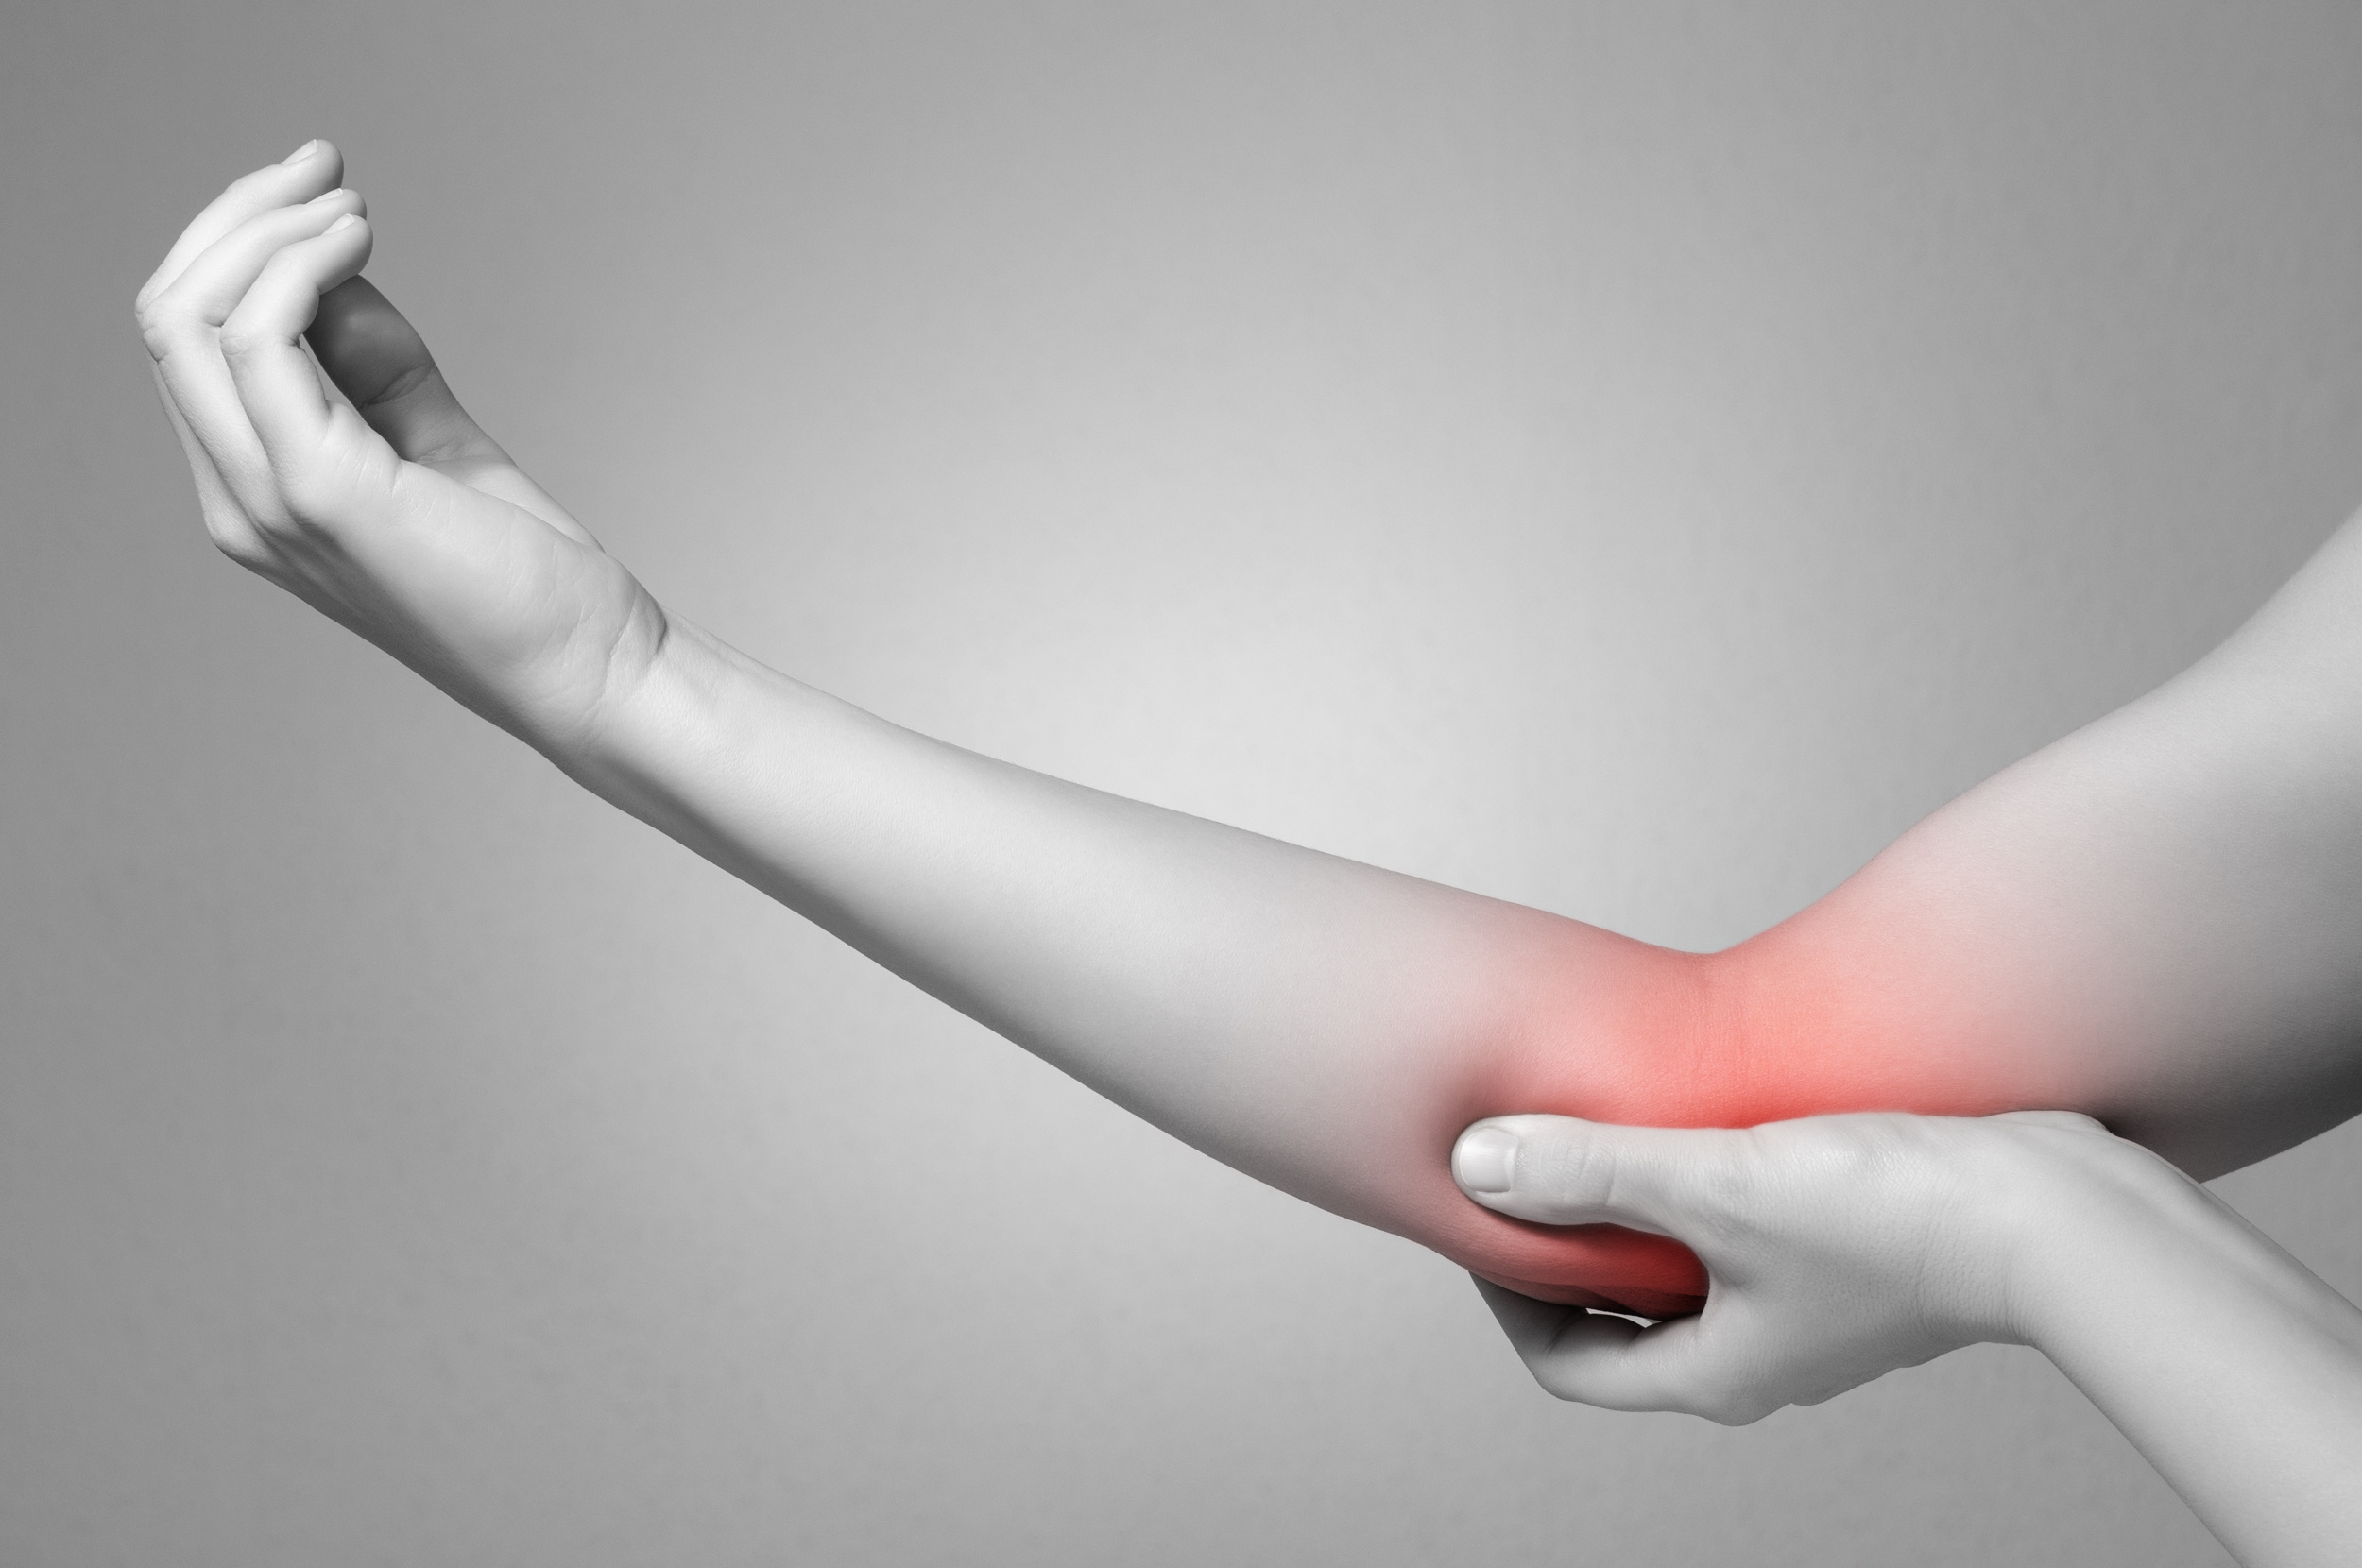 Cubital Tunnel Syndrome Treatment Without injection Or surgery